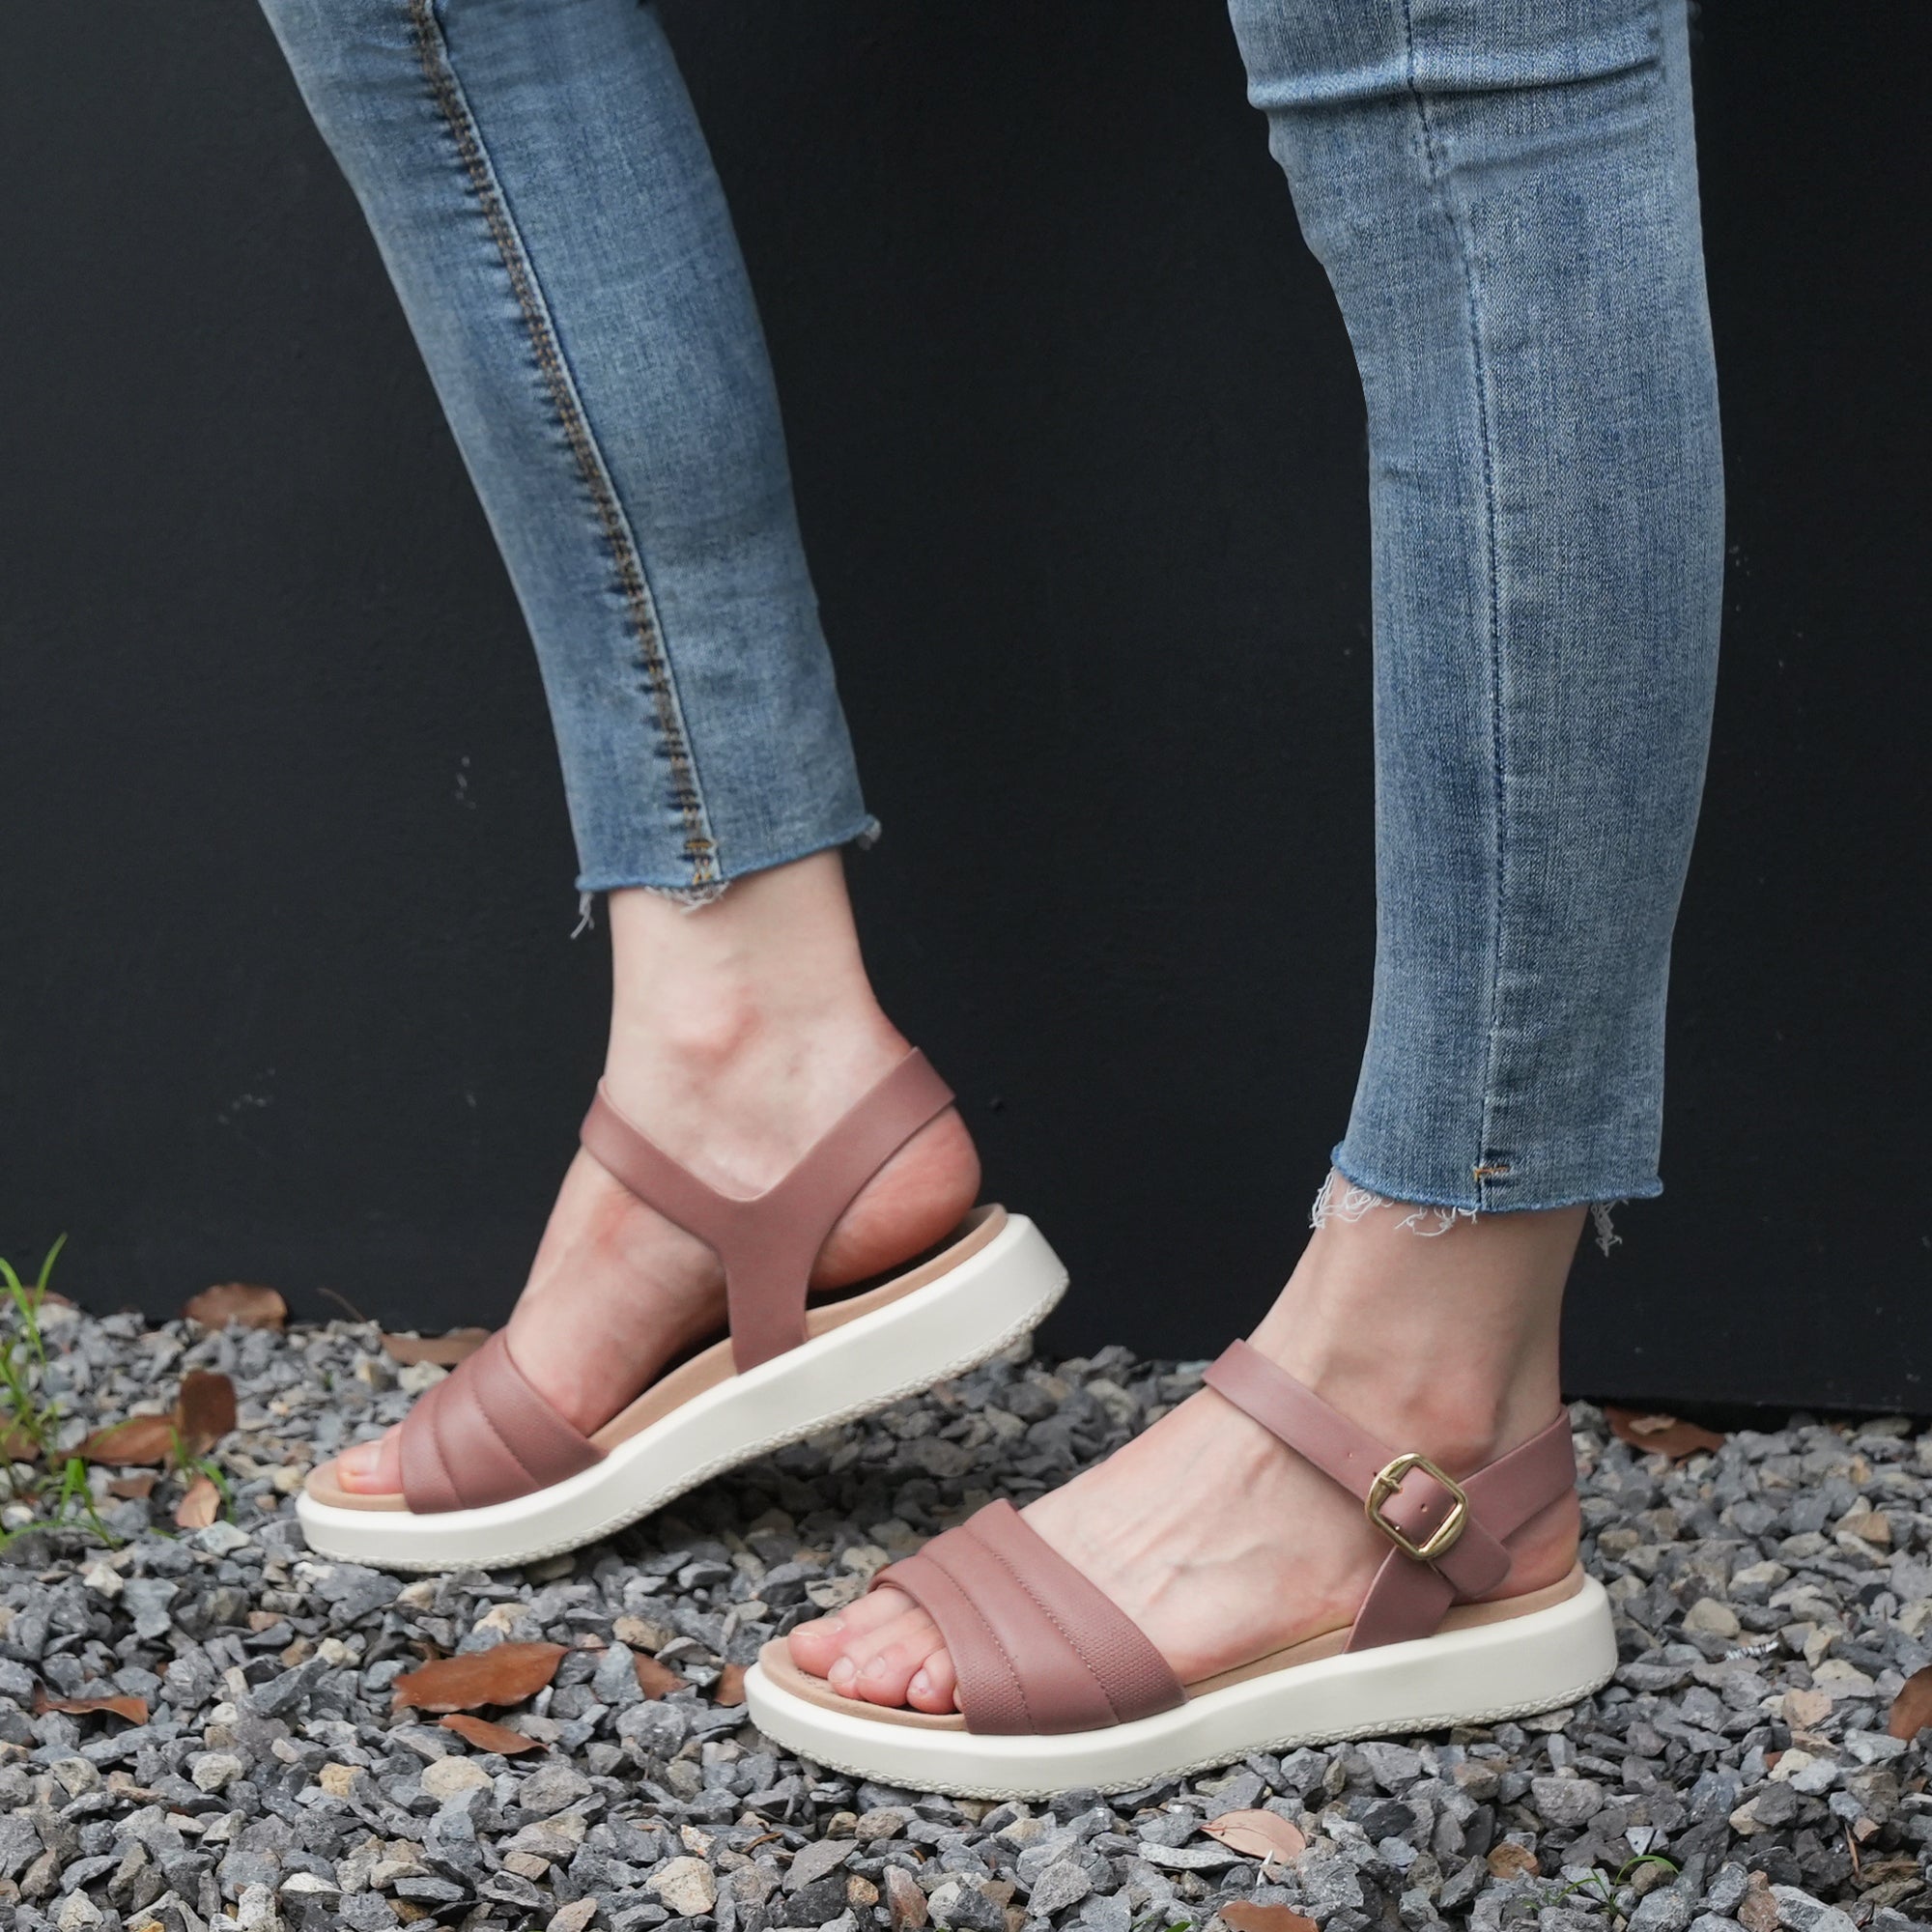 Apricot Arch Support Sandals-Katie